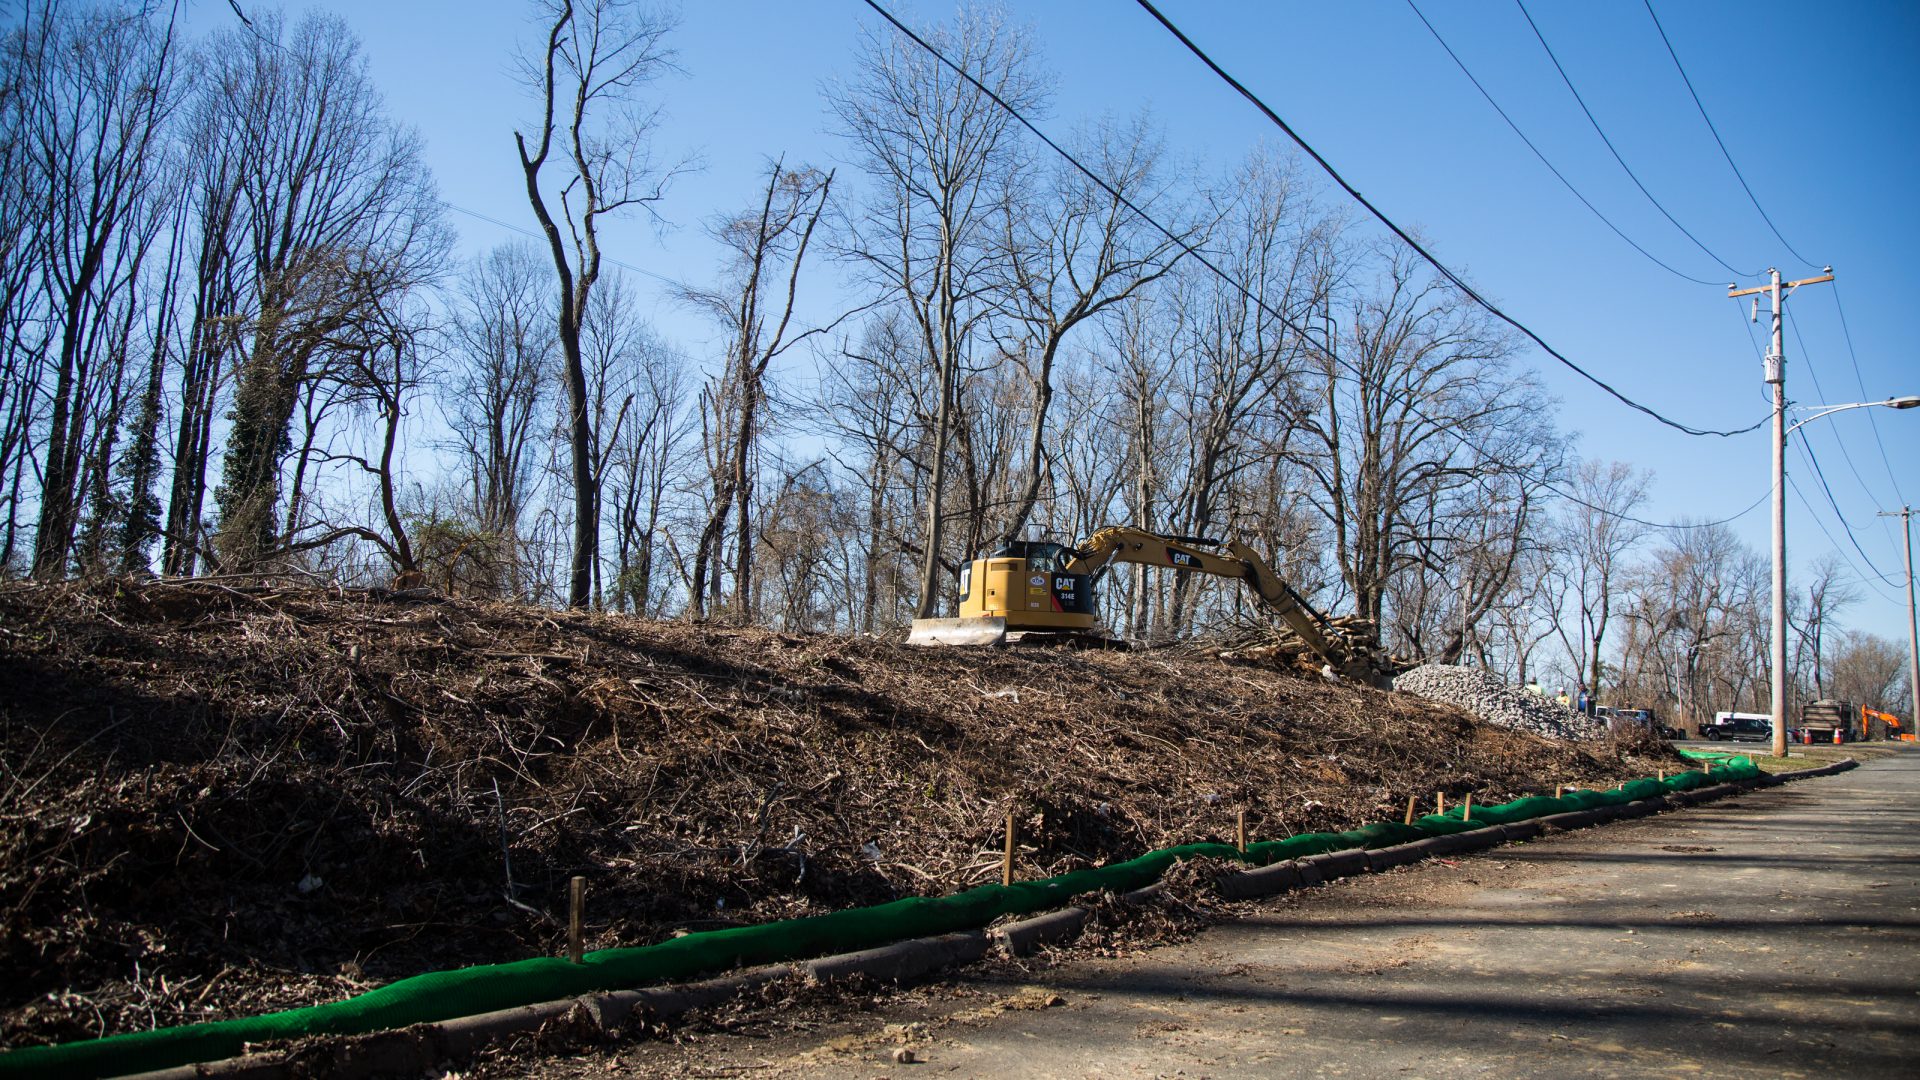 Construction equipment clears trees in Aston, Delaware County to make way for the Mariner East 2 natural gas liquids pipeline.